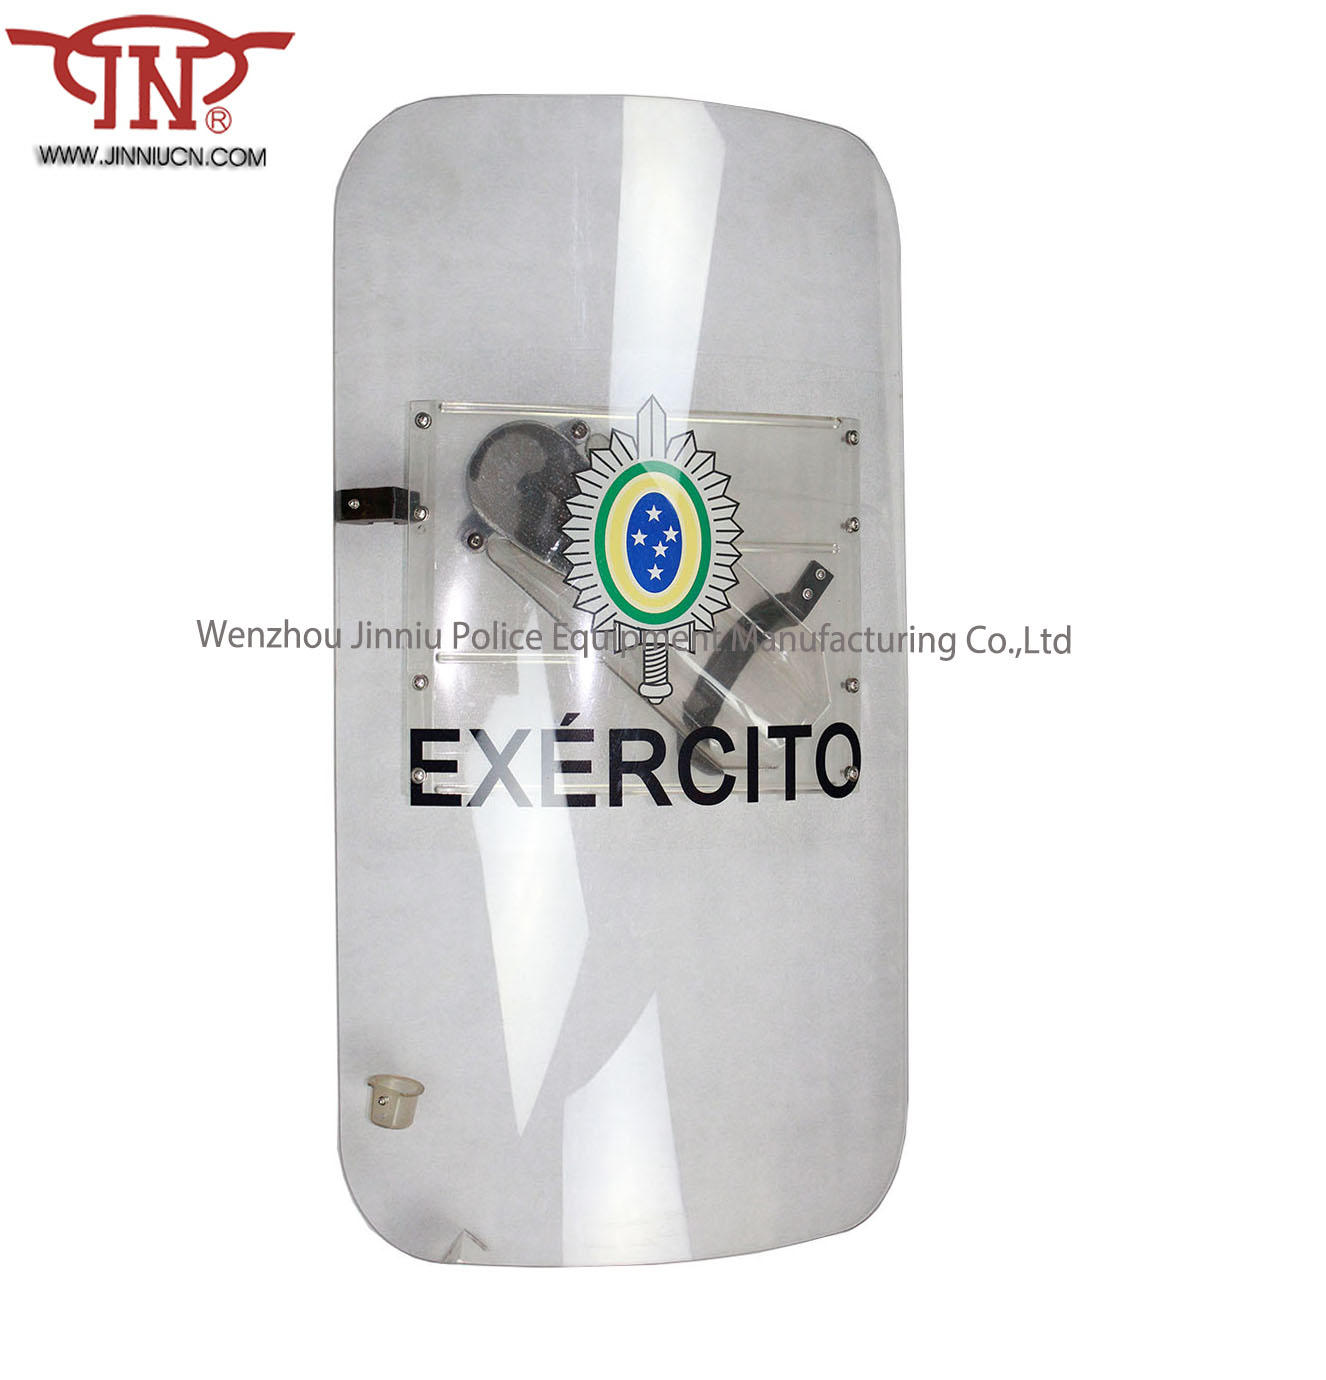 Brazil Riot shield Exercito Shield with baton holster Factory